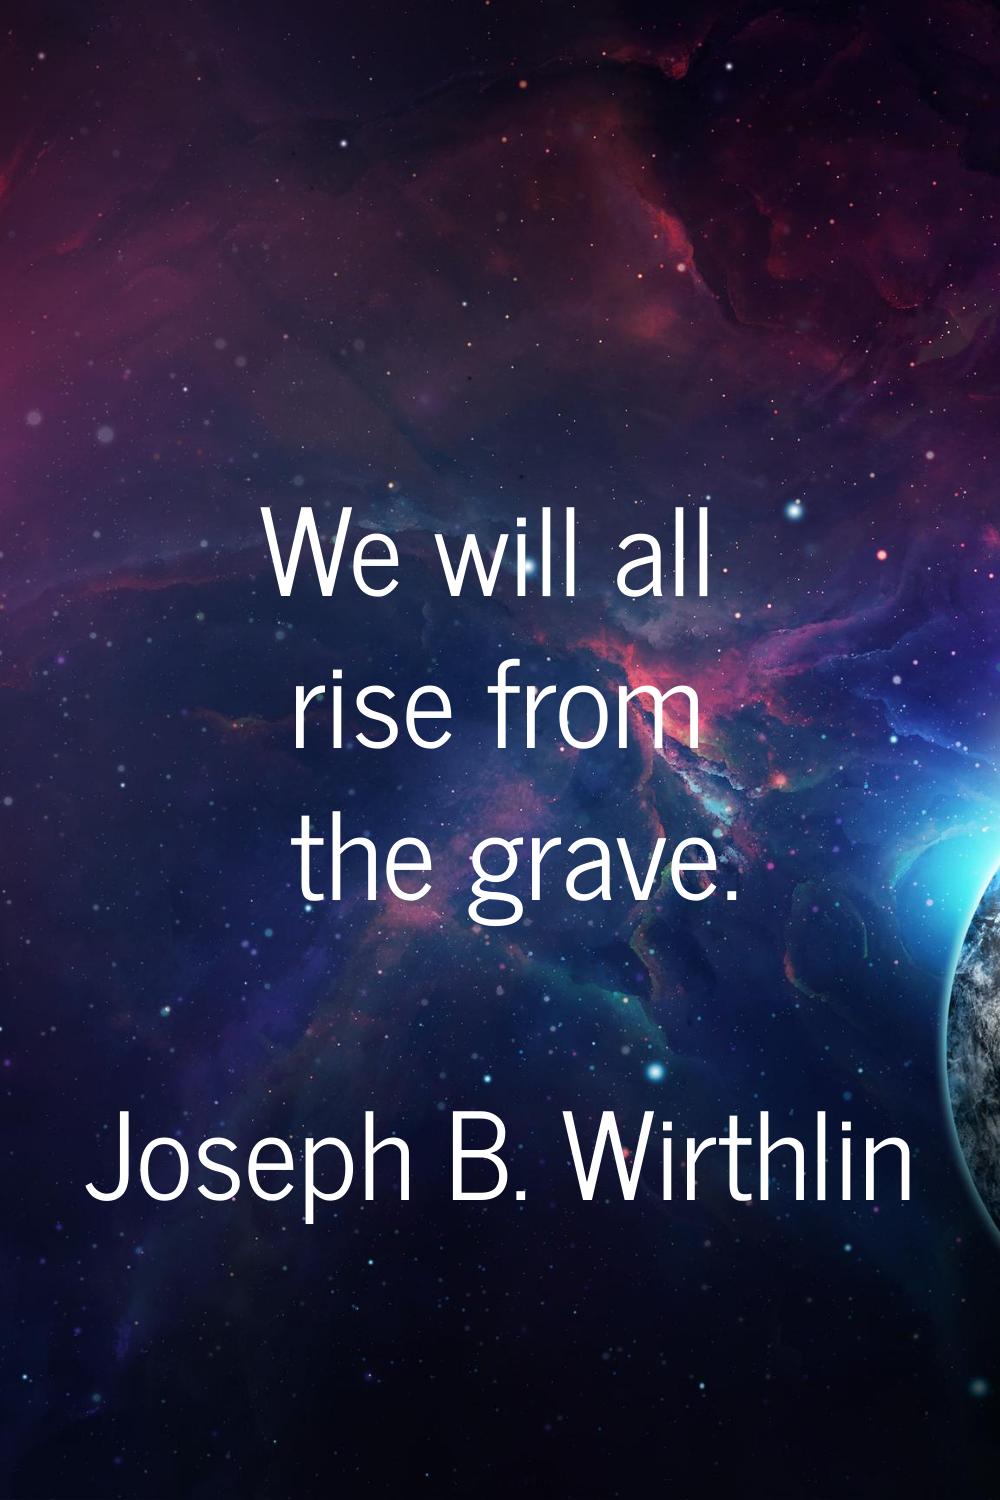 We will all rise from the grave.